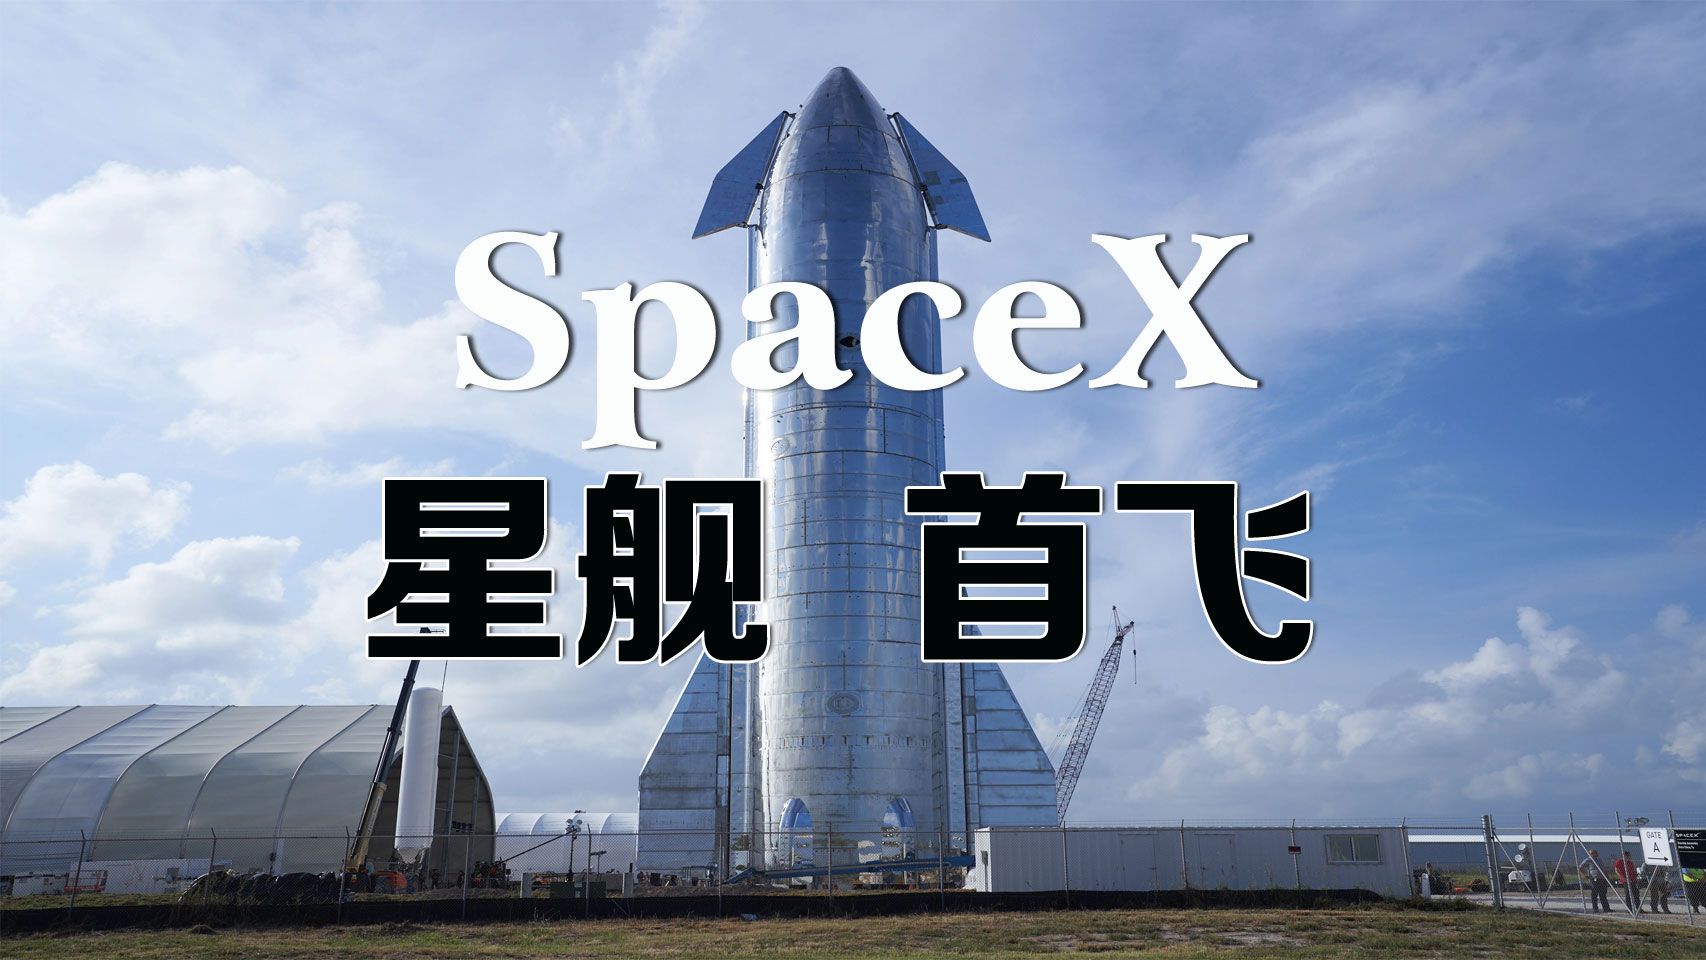 FAA approves SpaceX’s Starship launch to 50,000 feet